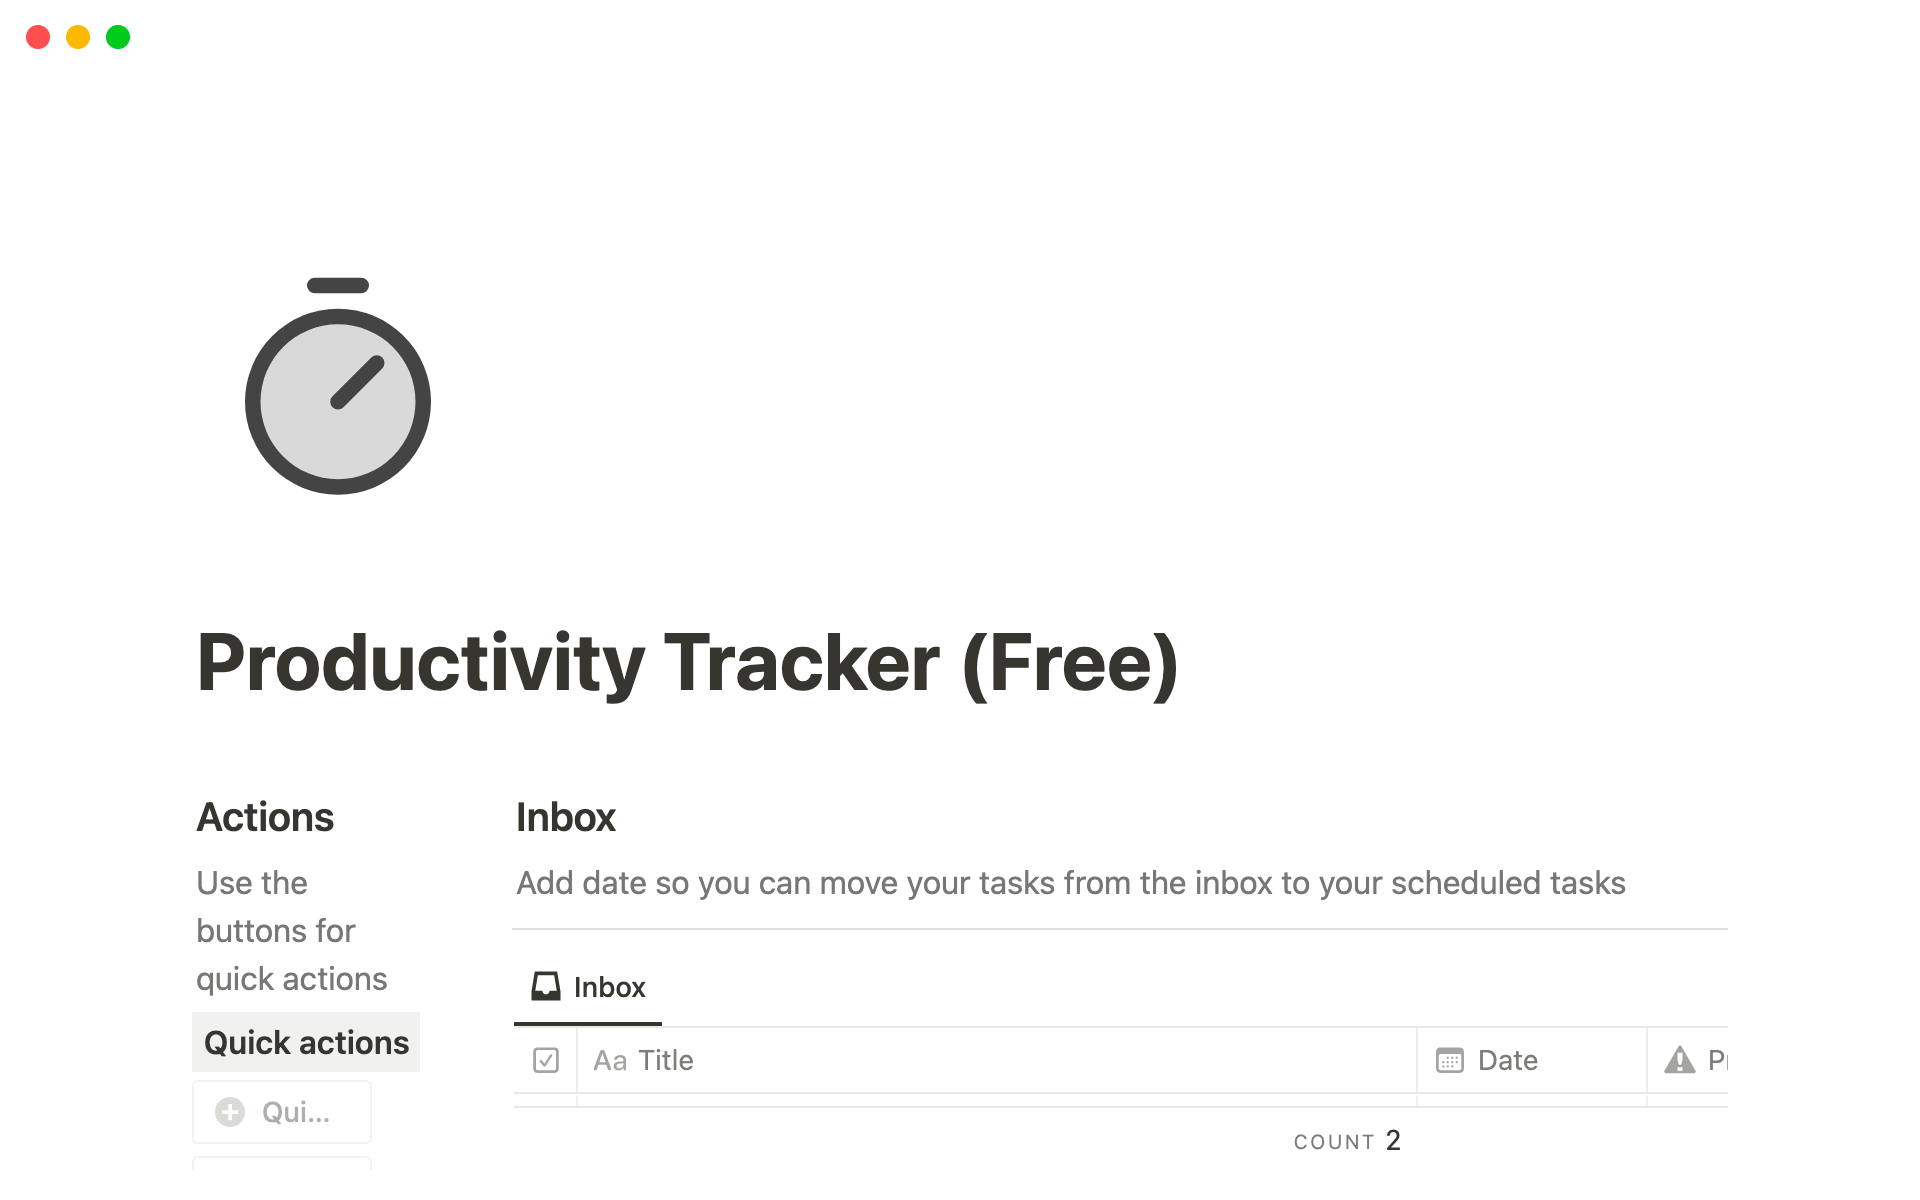 Our Ultimate Productivity Tracker Notion Template provides you with the tools to streamline your workflow, manage your time effectively, and foster a mindset of constant growth and improvement.